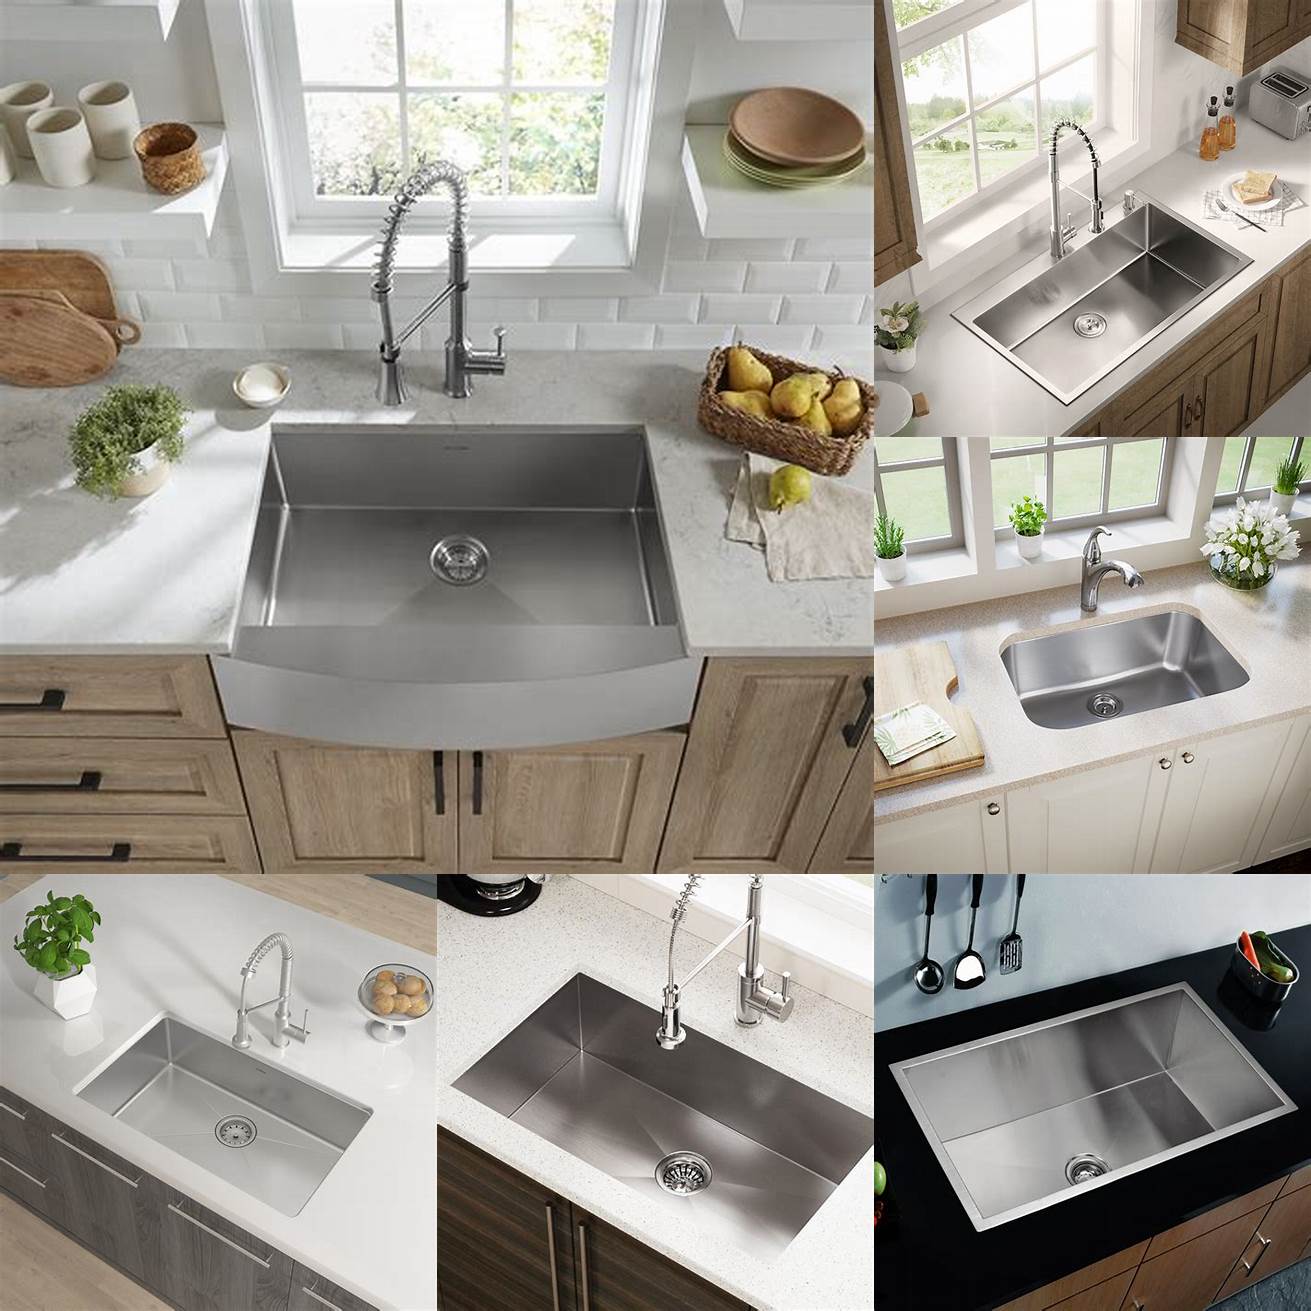 A picture of a stainless steel kitchen sink with a single bowl and a high arch faucet